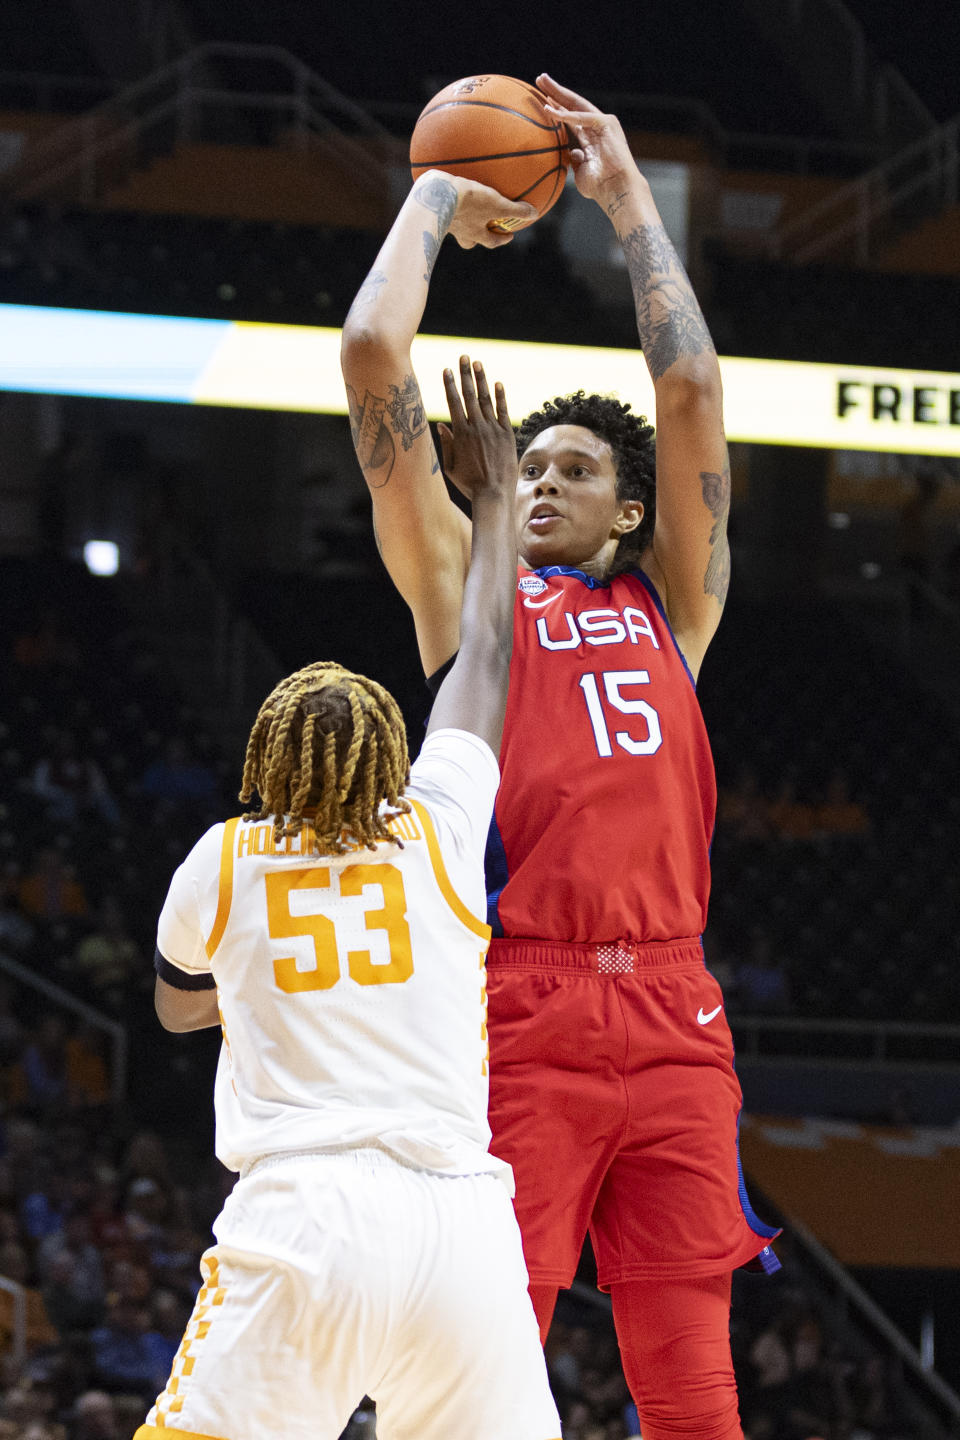 Team USA center Brittany Griner (15) goes to shoot over Tennessee forward Jillian Hollingshead (53) during the first half of an NCAA college basketball exhibition game, Sunday, Nov. 5, 2023, in Knoxville, Tenn. (AP Photo/Wade Payne)